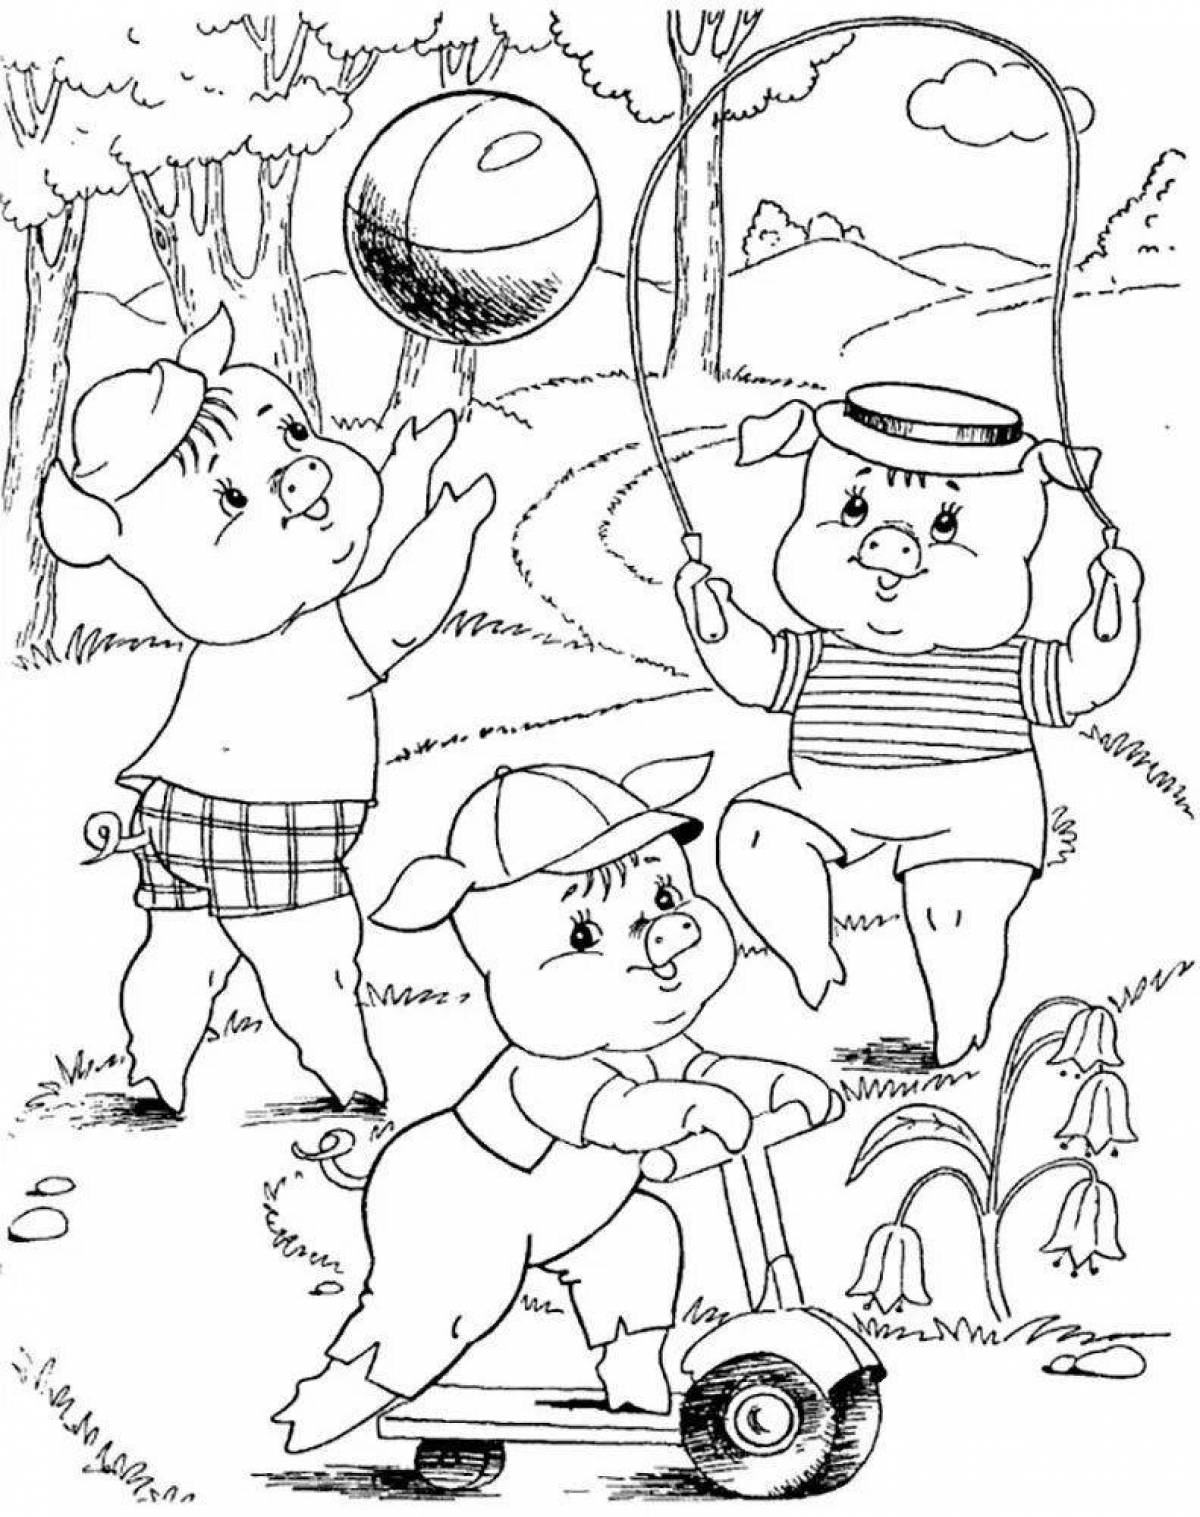 Cute Mikhalkov coloring book for kids